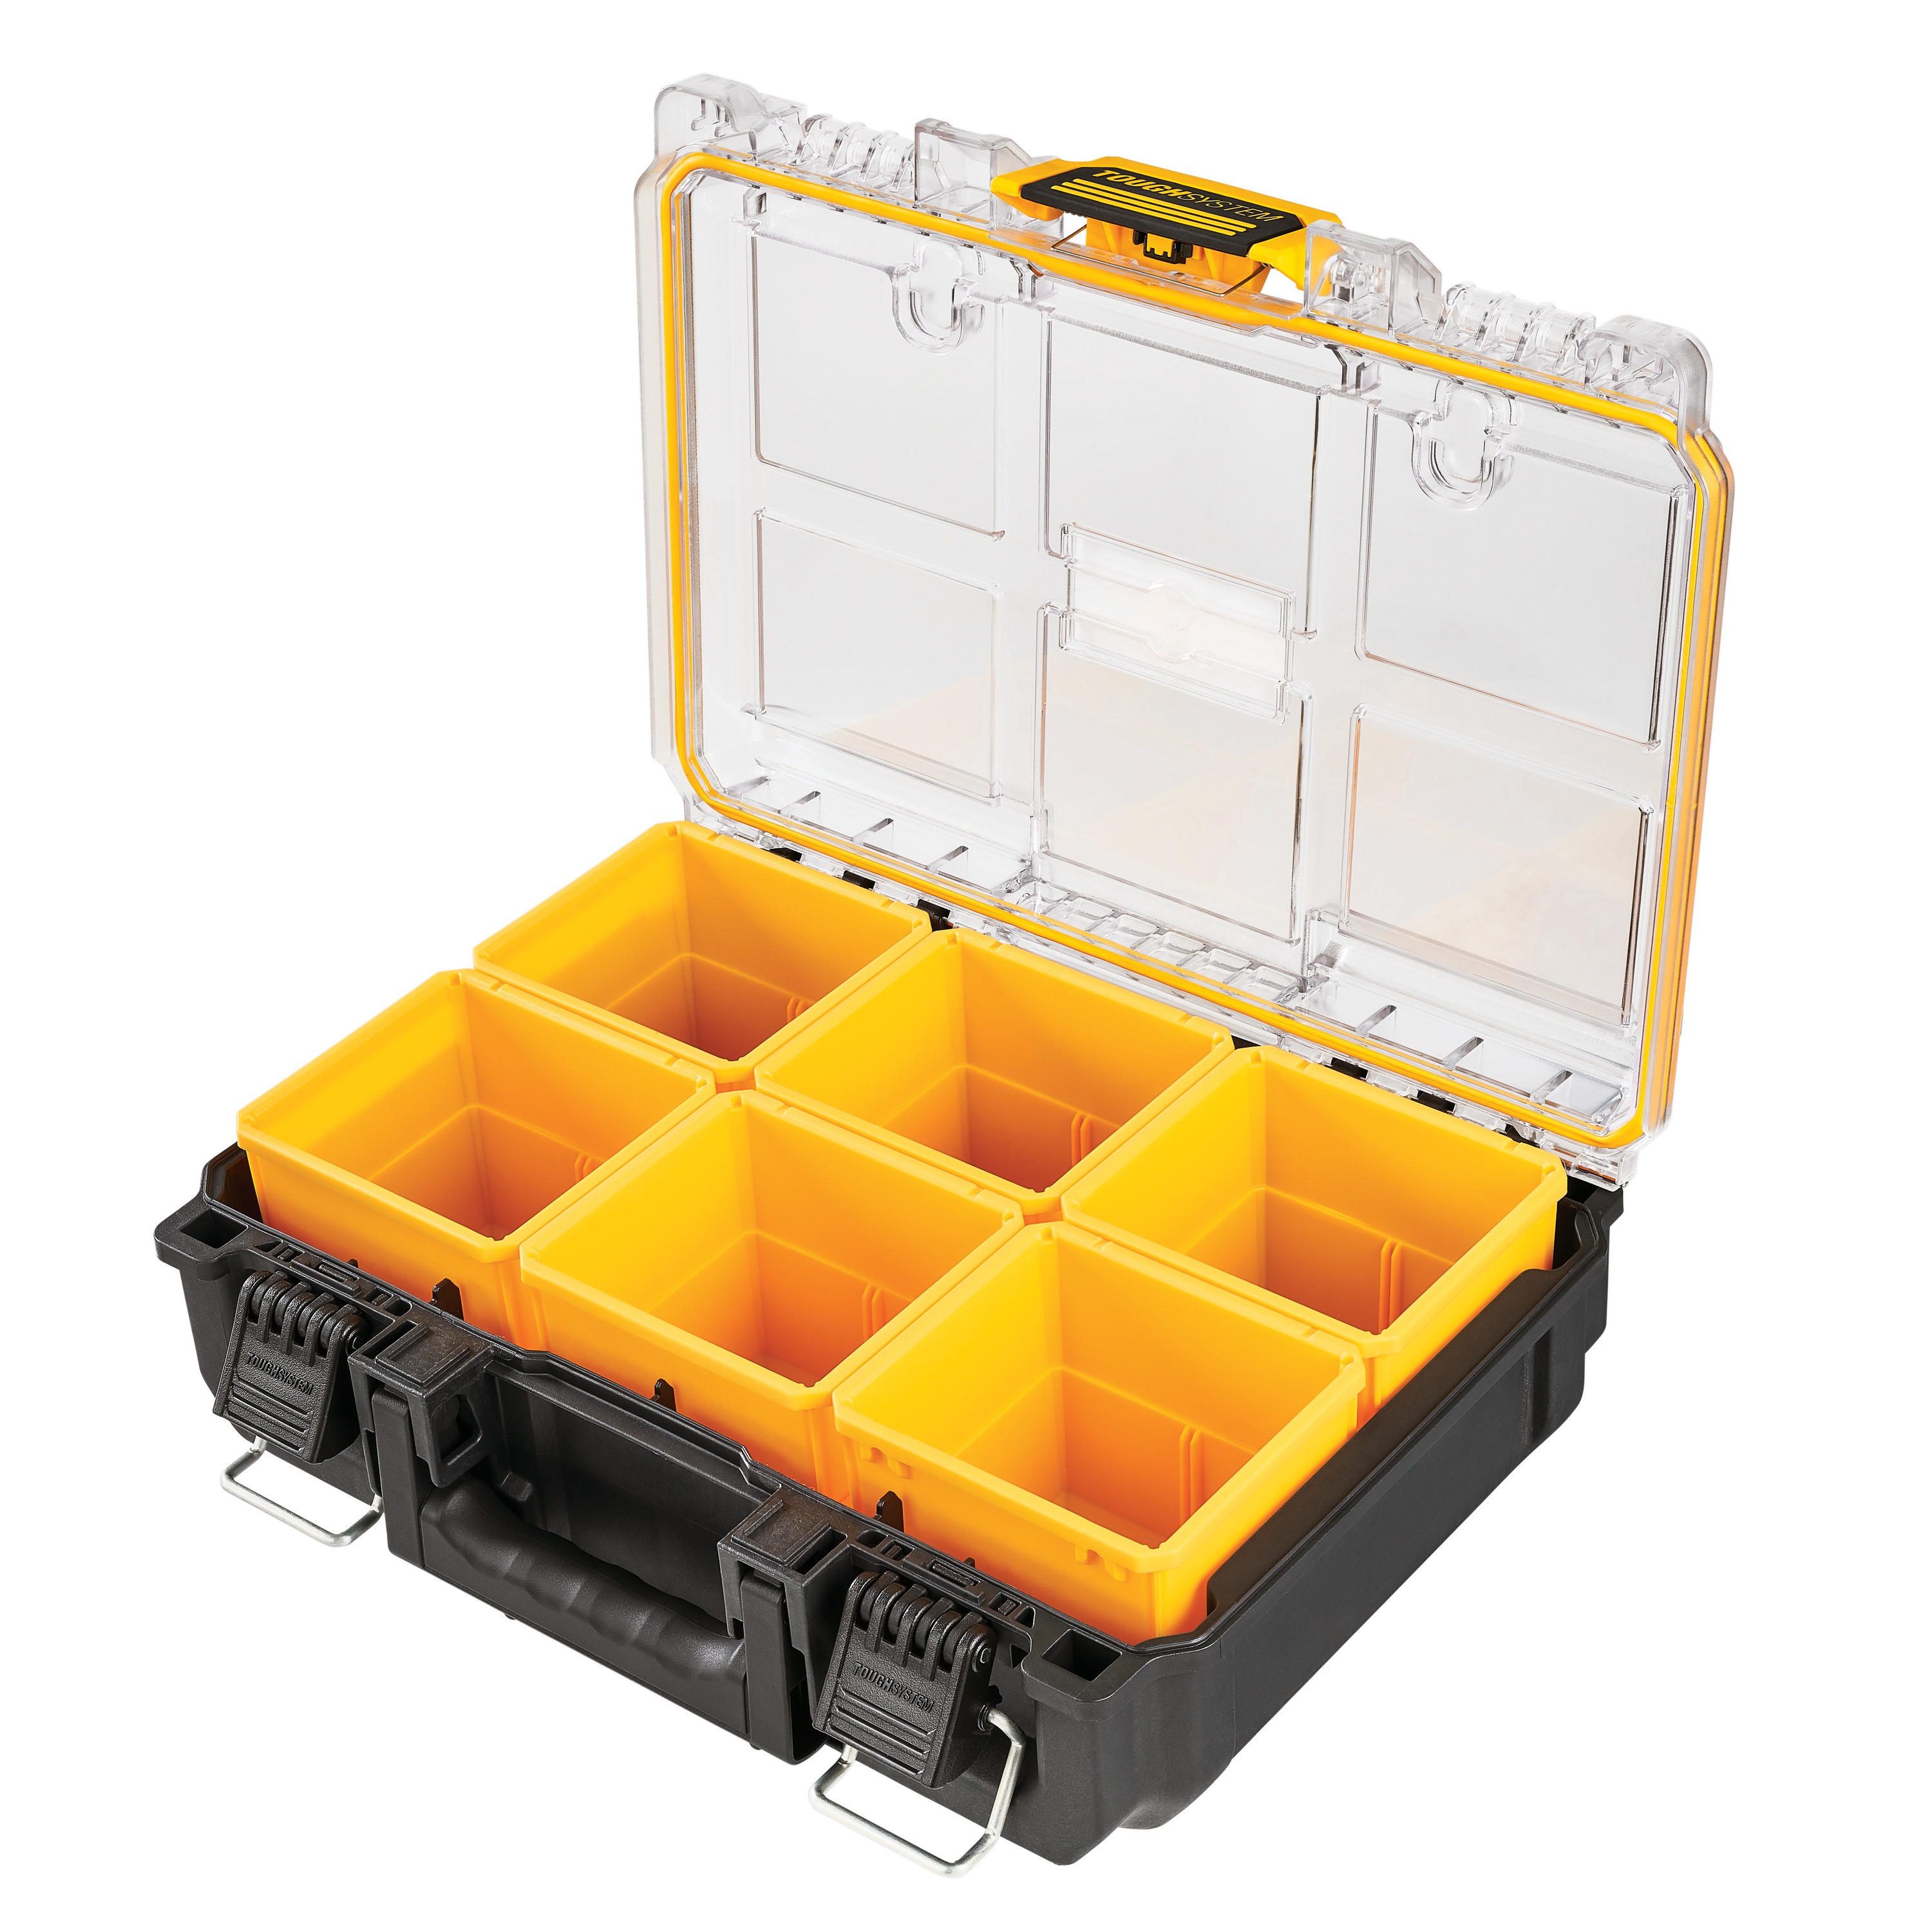 tough system 2.0 deep compact organizer with lid open.